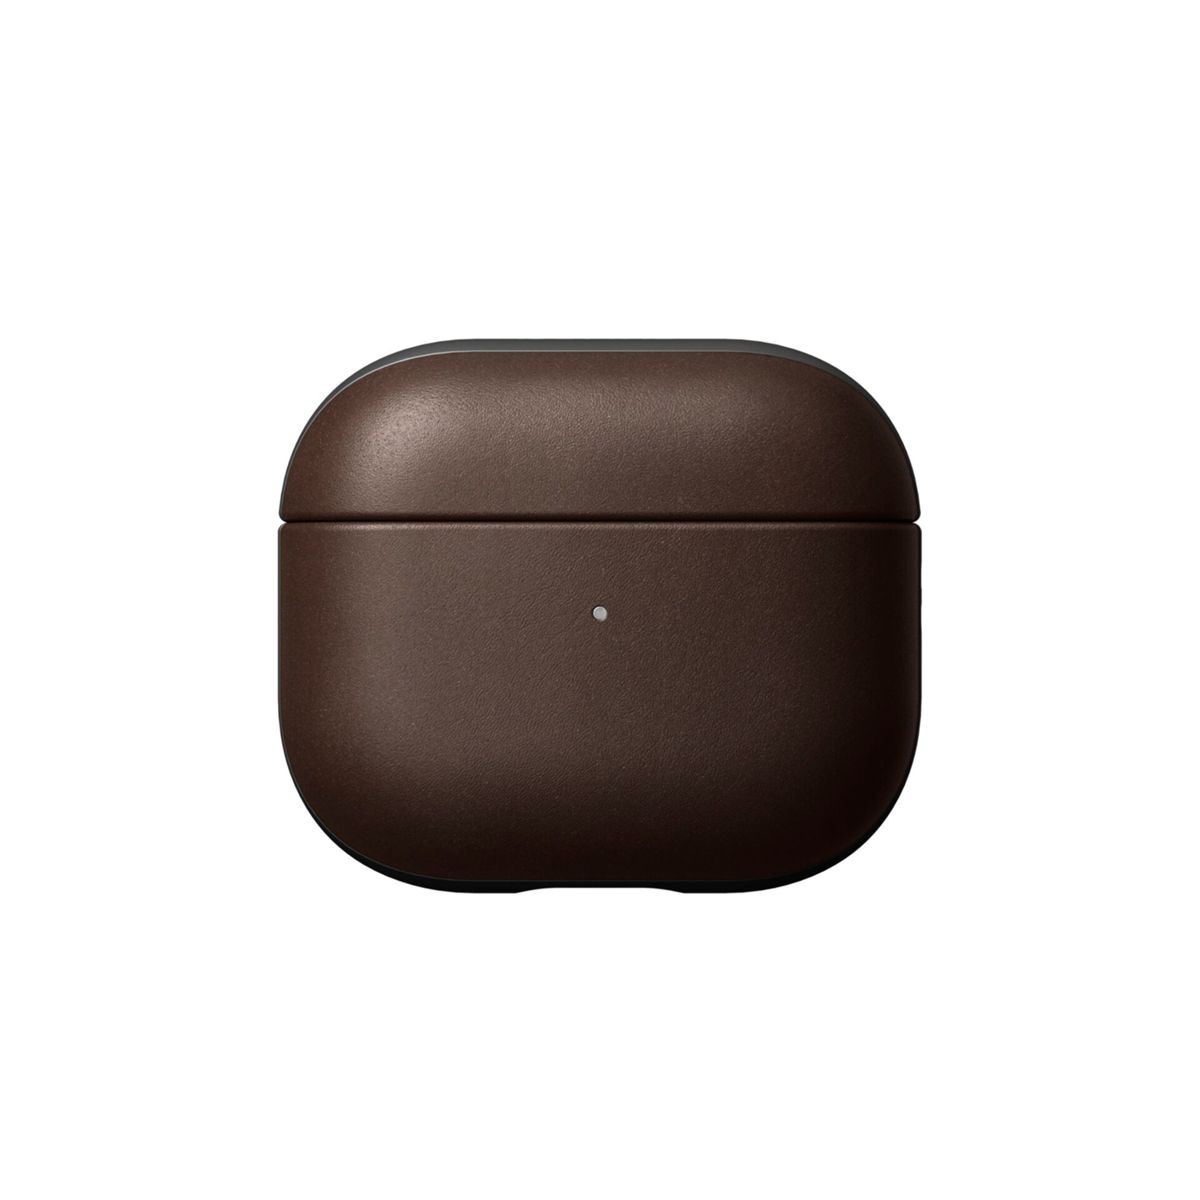 NOMAD Airpods V3 Case Schutzhülle braun Leather Brown Rustic